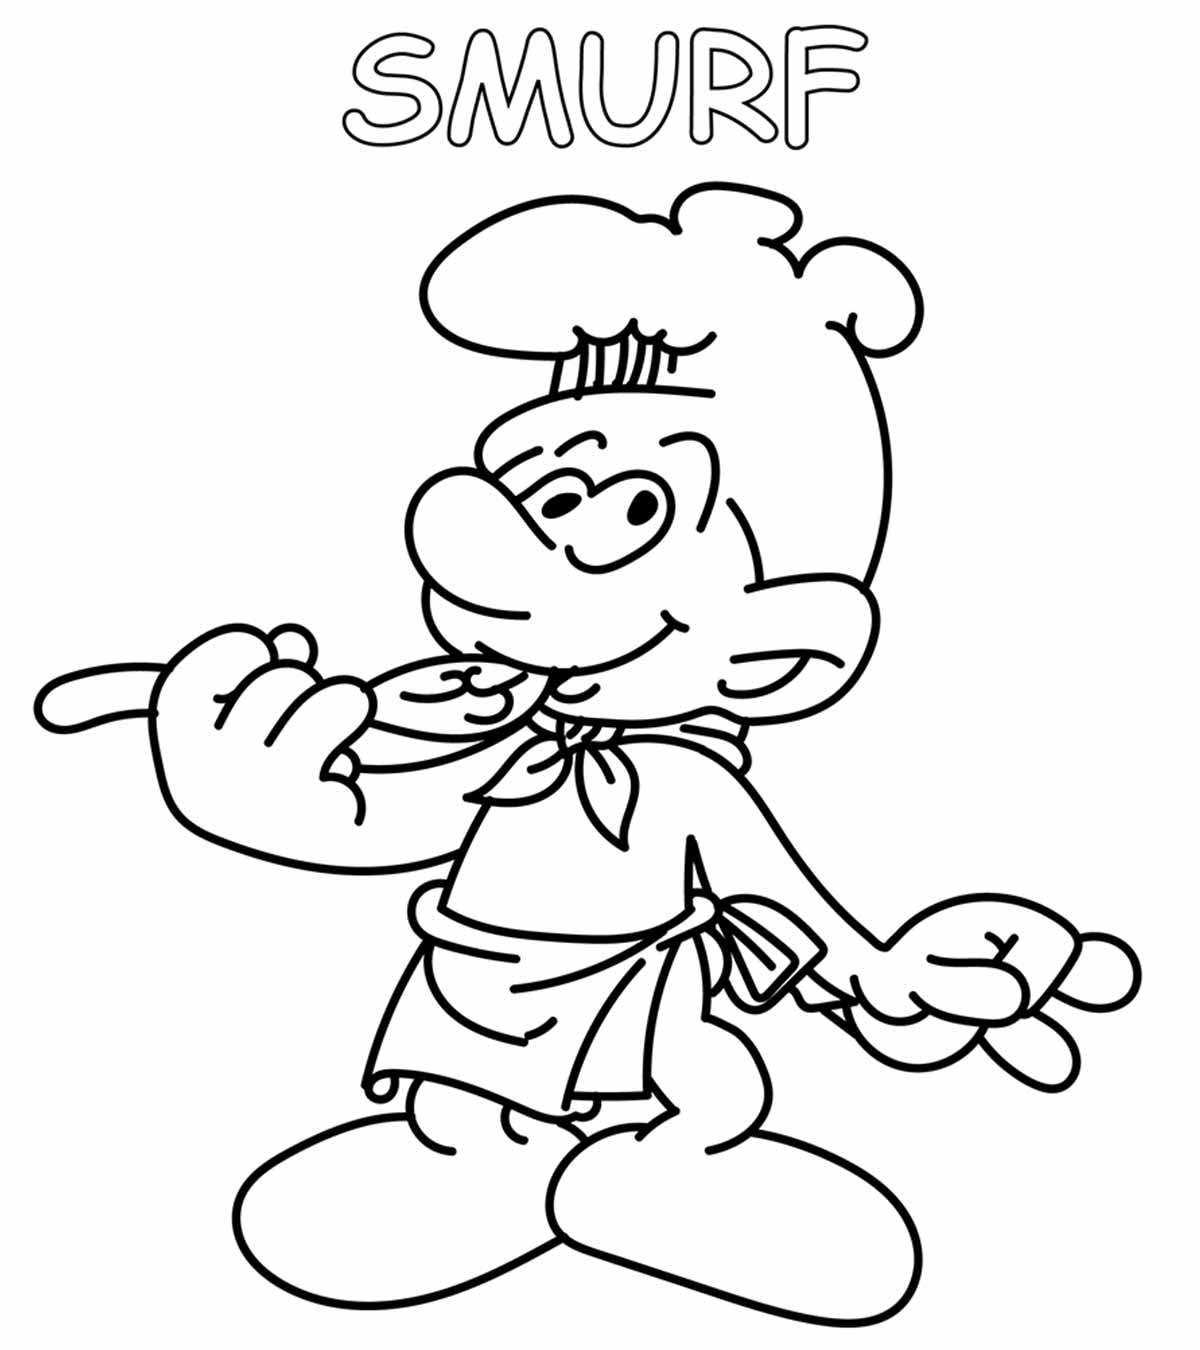 25 Funny Smurf Coloring Pages For Your Little Ones